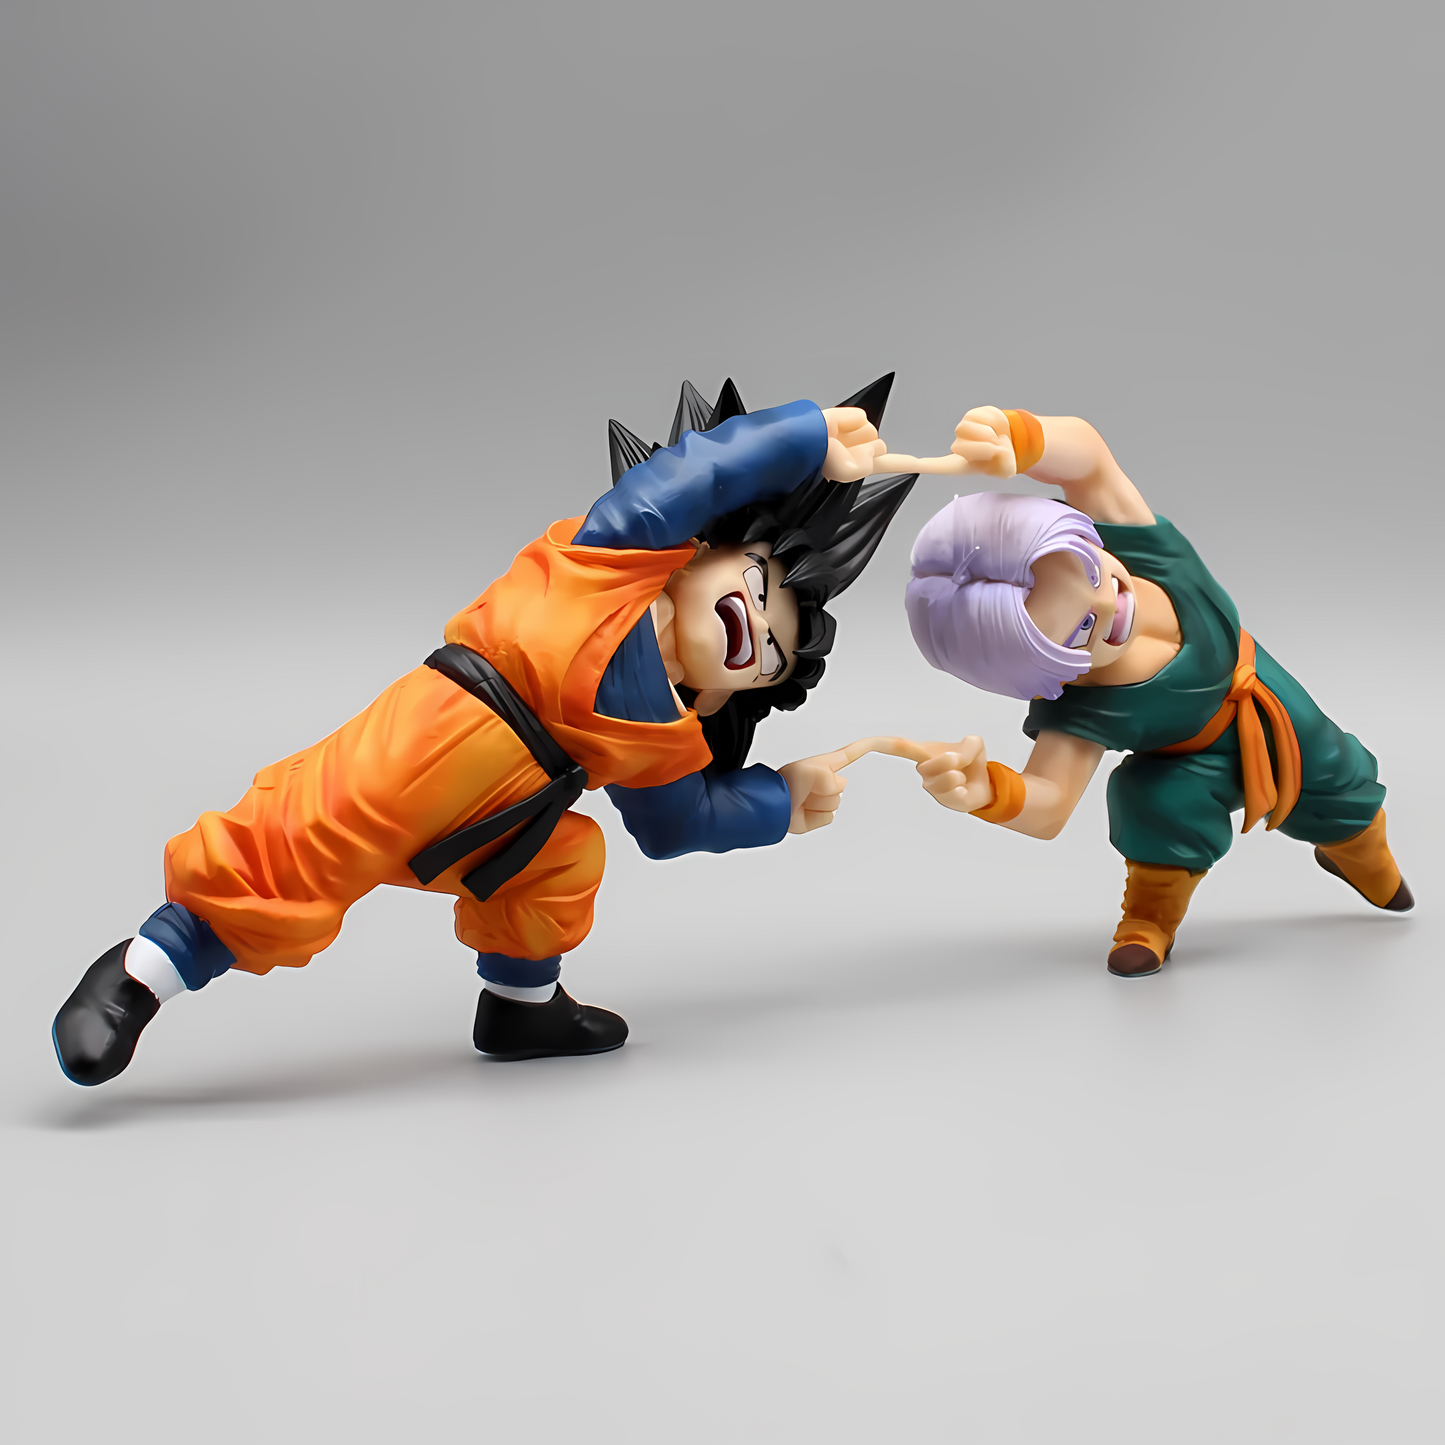 Side view of Goten and Trunks collectible figures performing the fusion dance, showcasing their focused expressions and the fluidity of their movements.